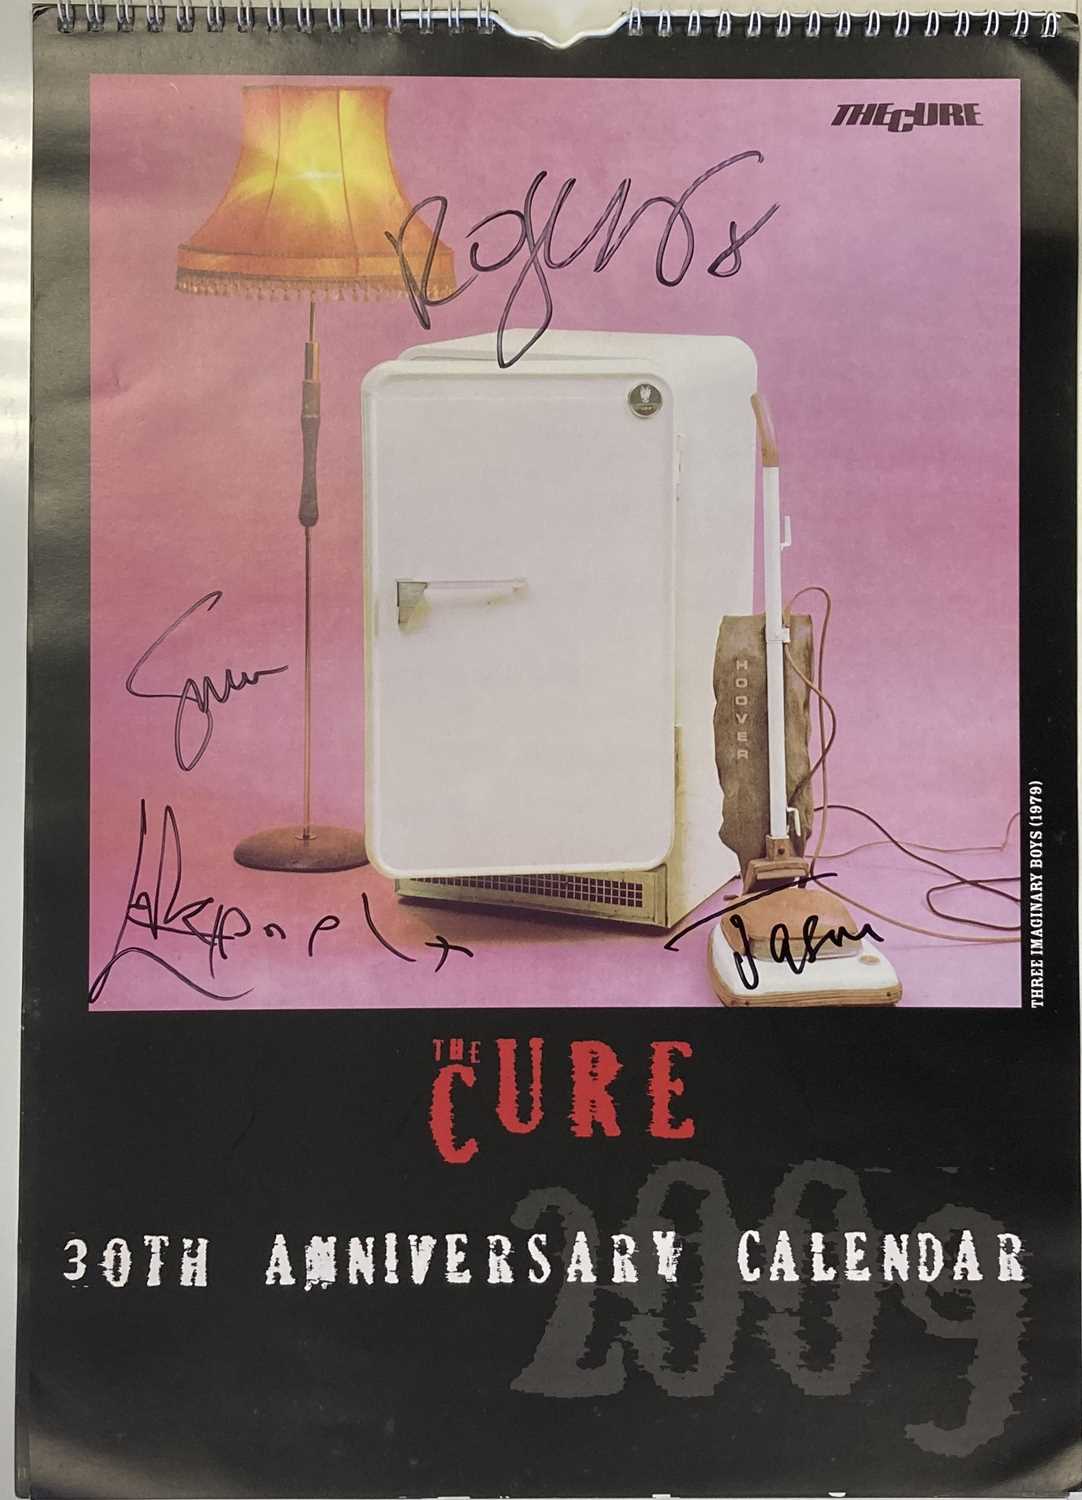 Lot 211 THE CURE SIGNED CALENDAR